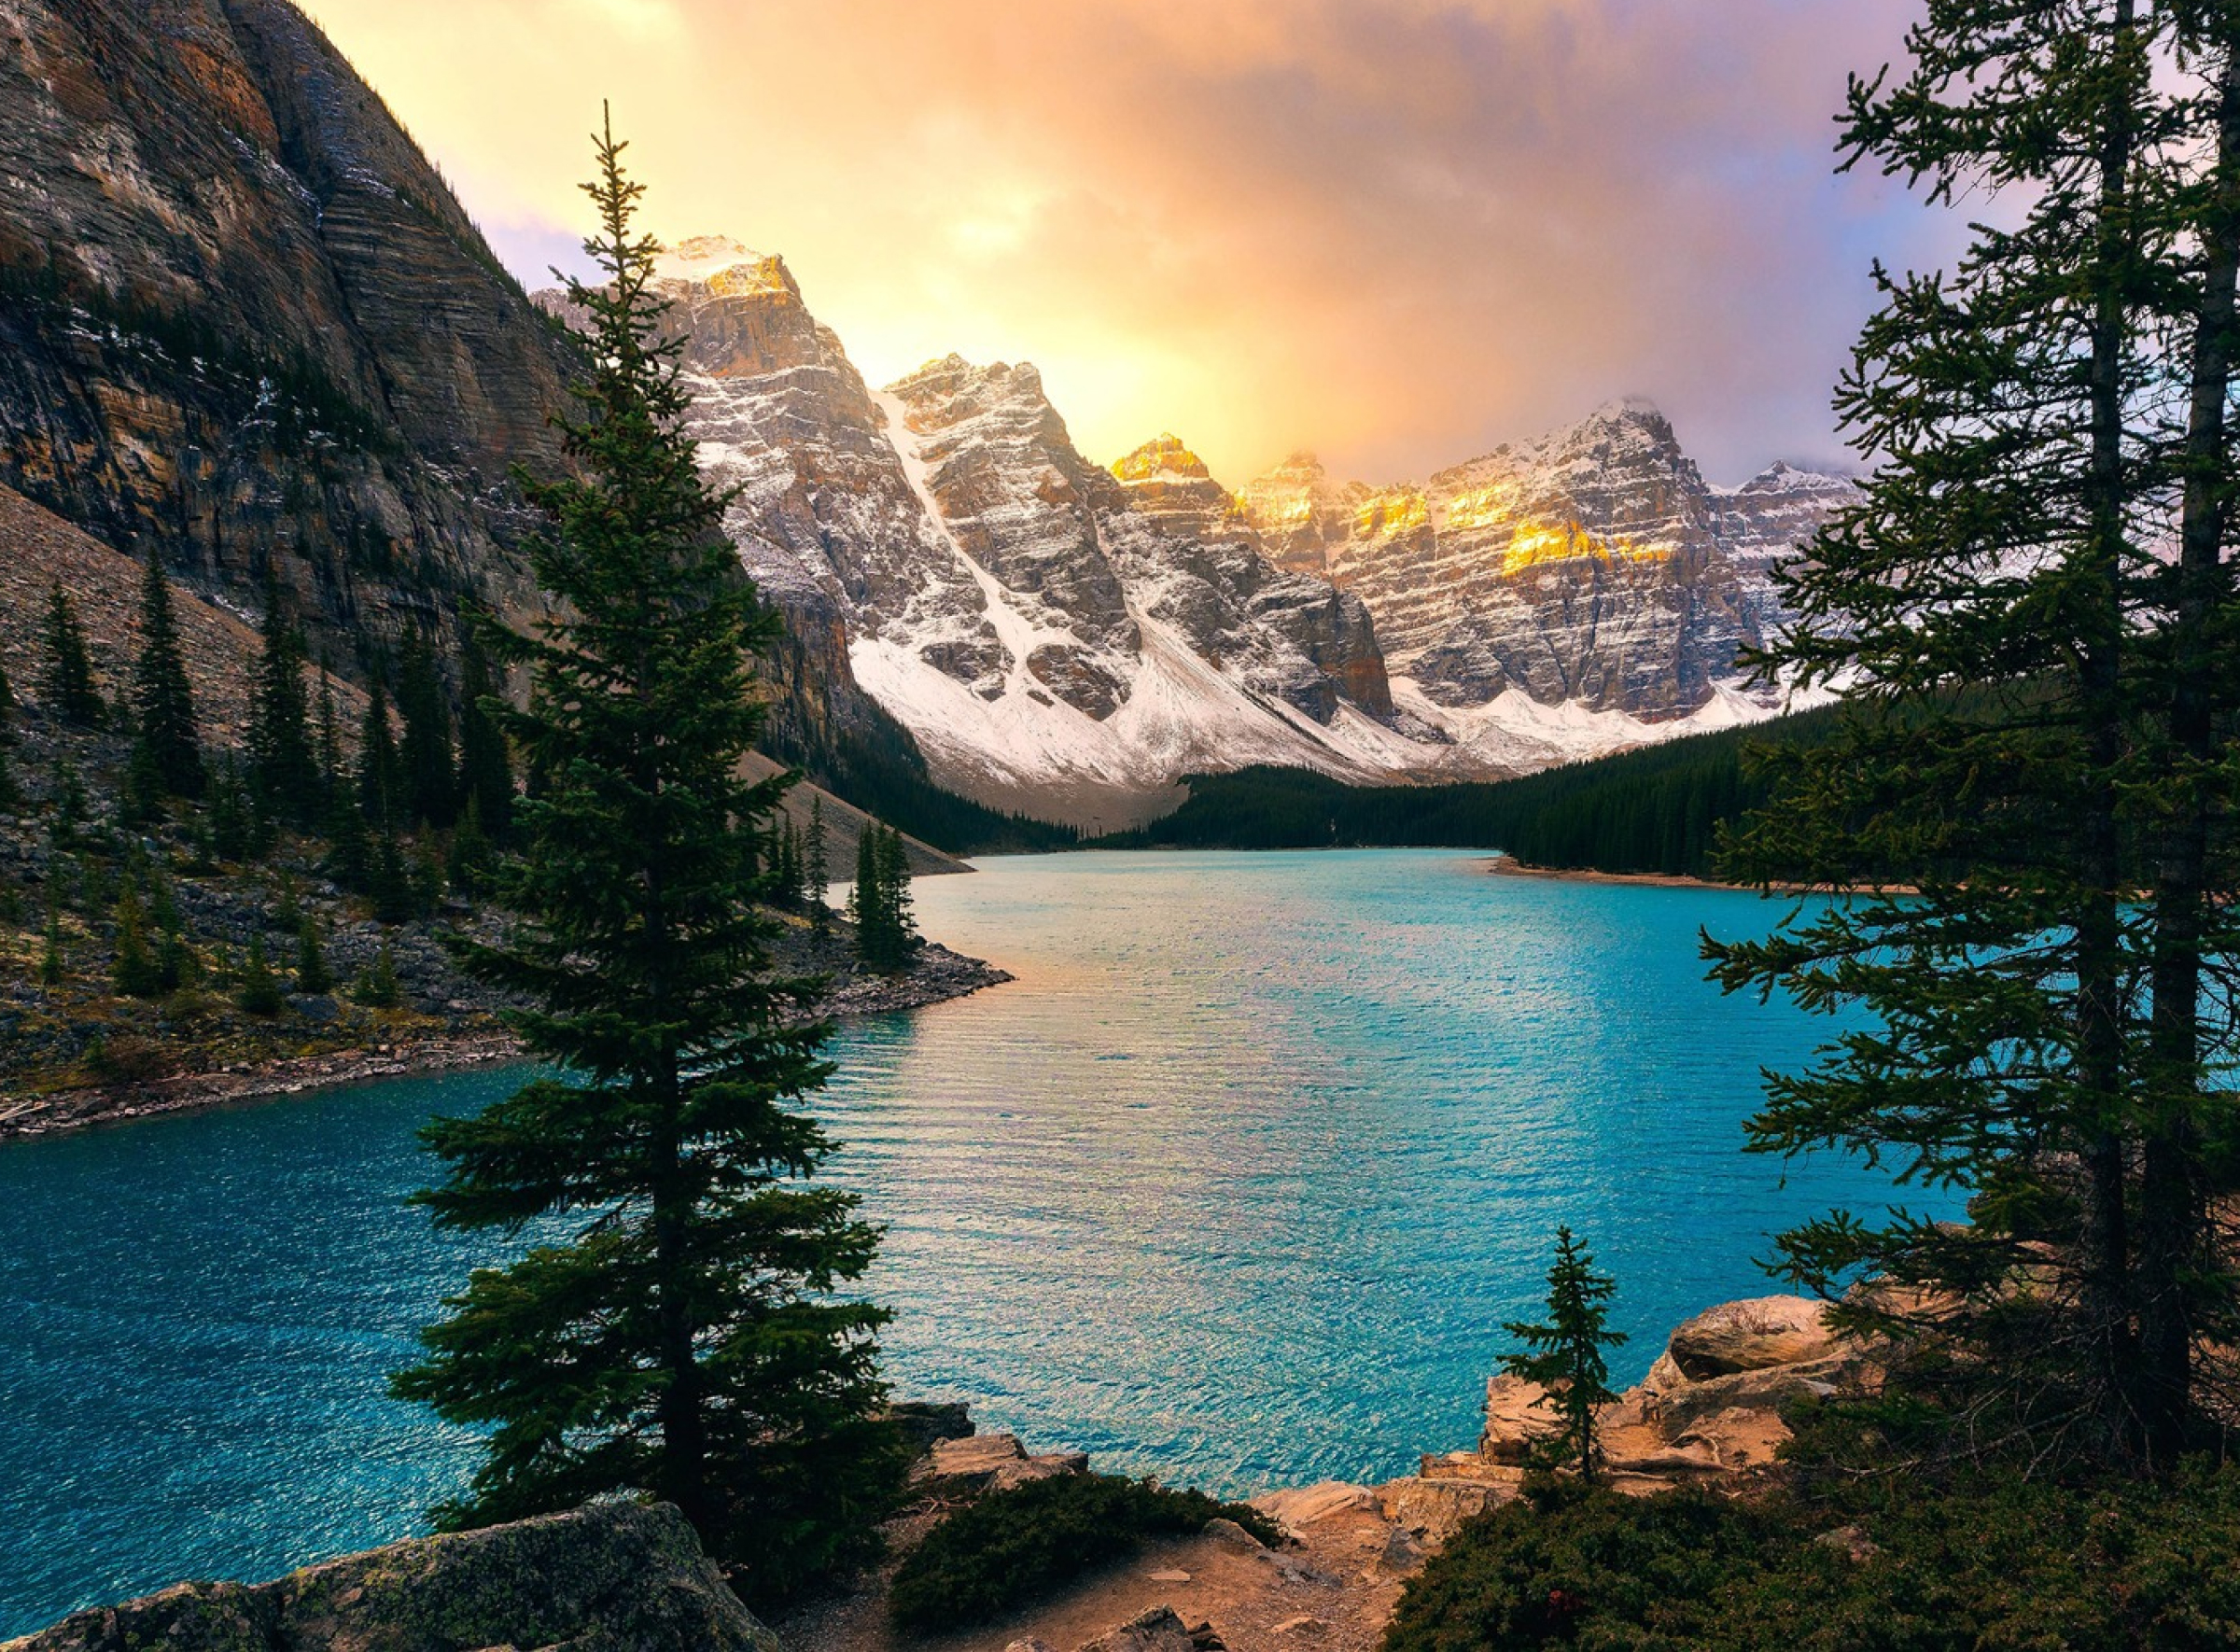 The Best of the Banff National Park: 10 Fun Places You Can Visit